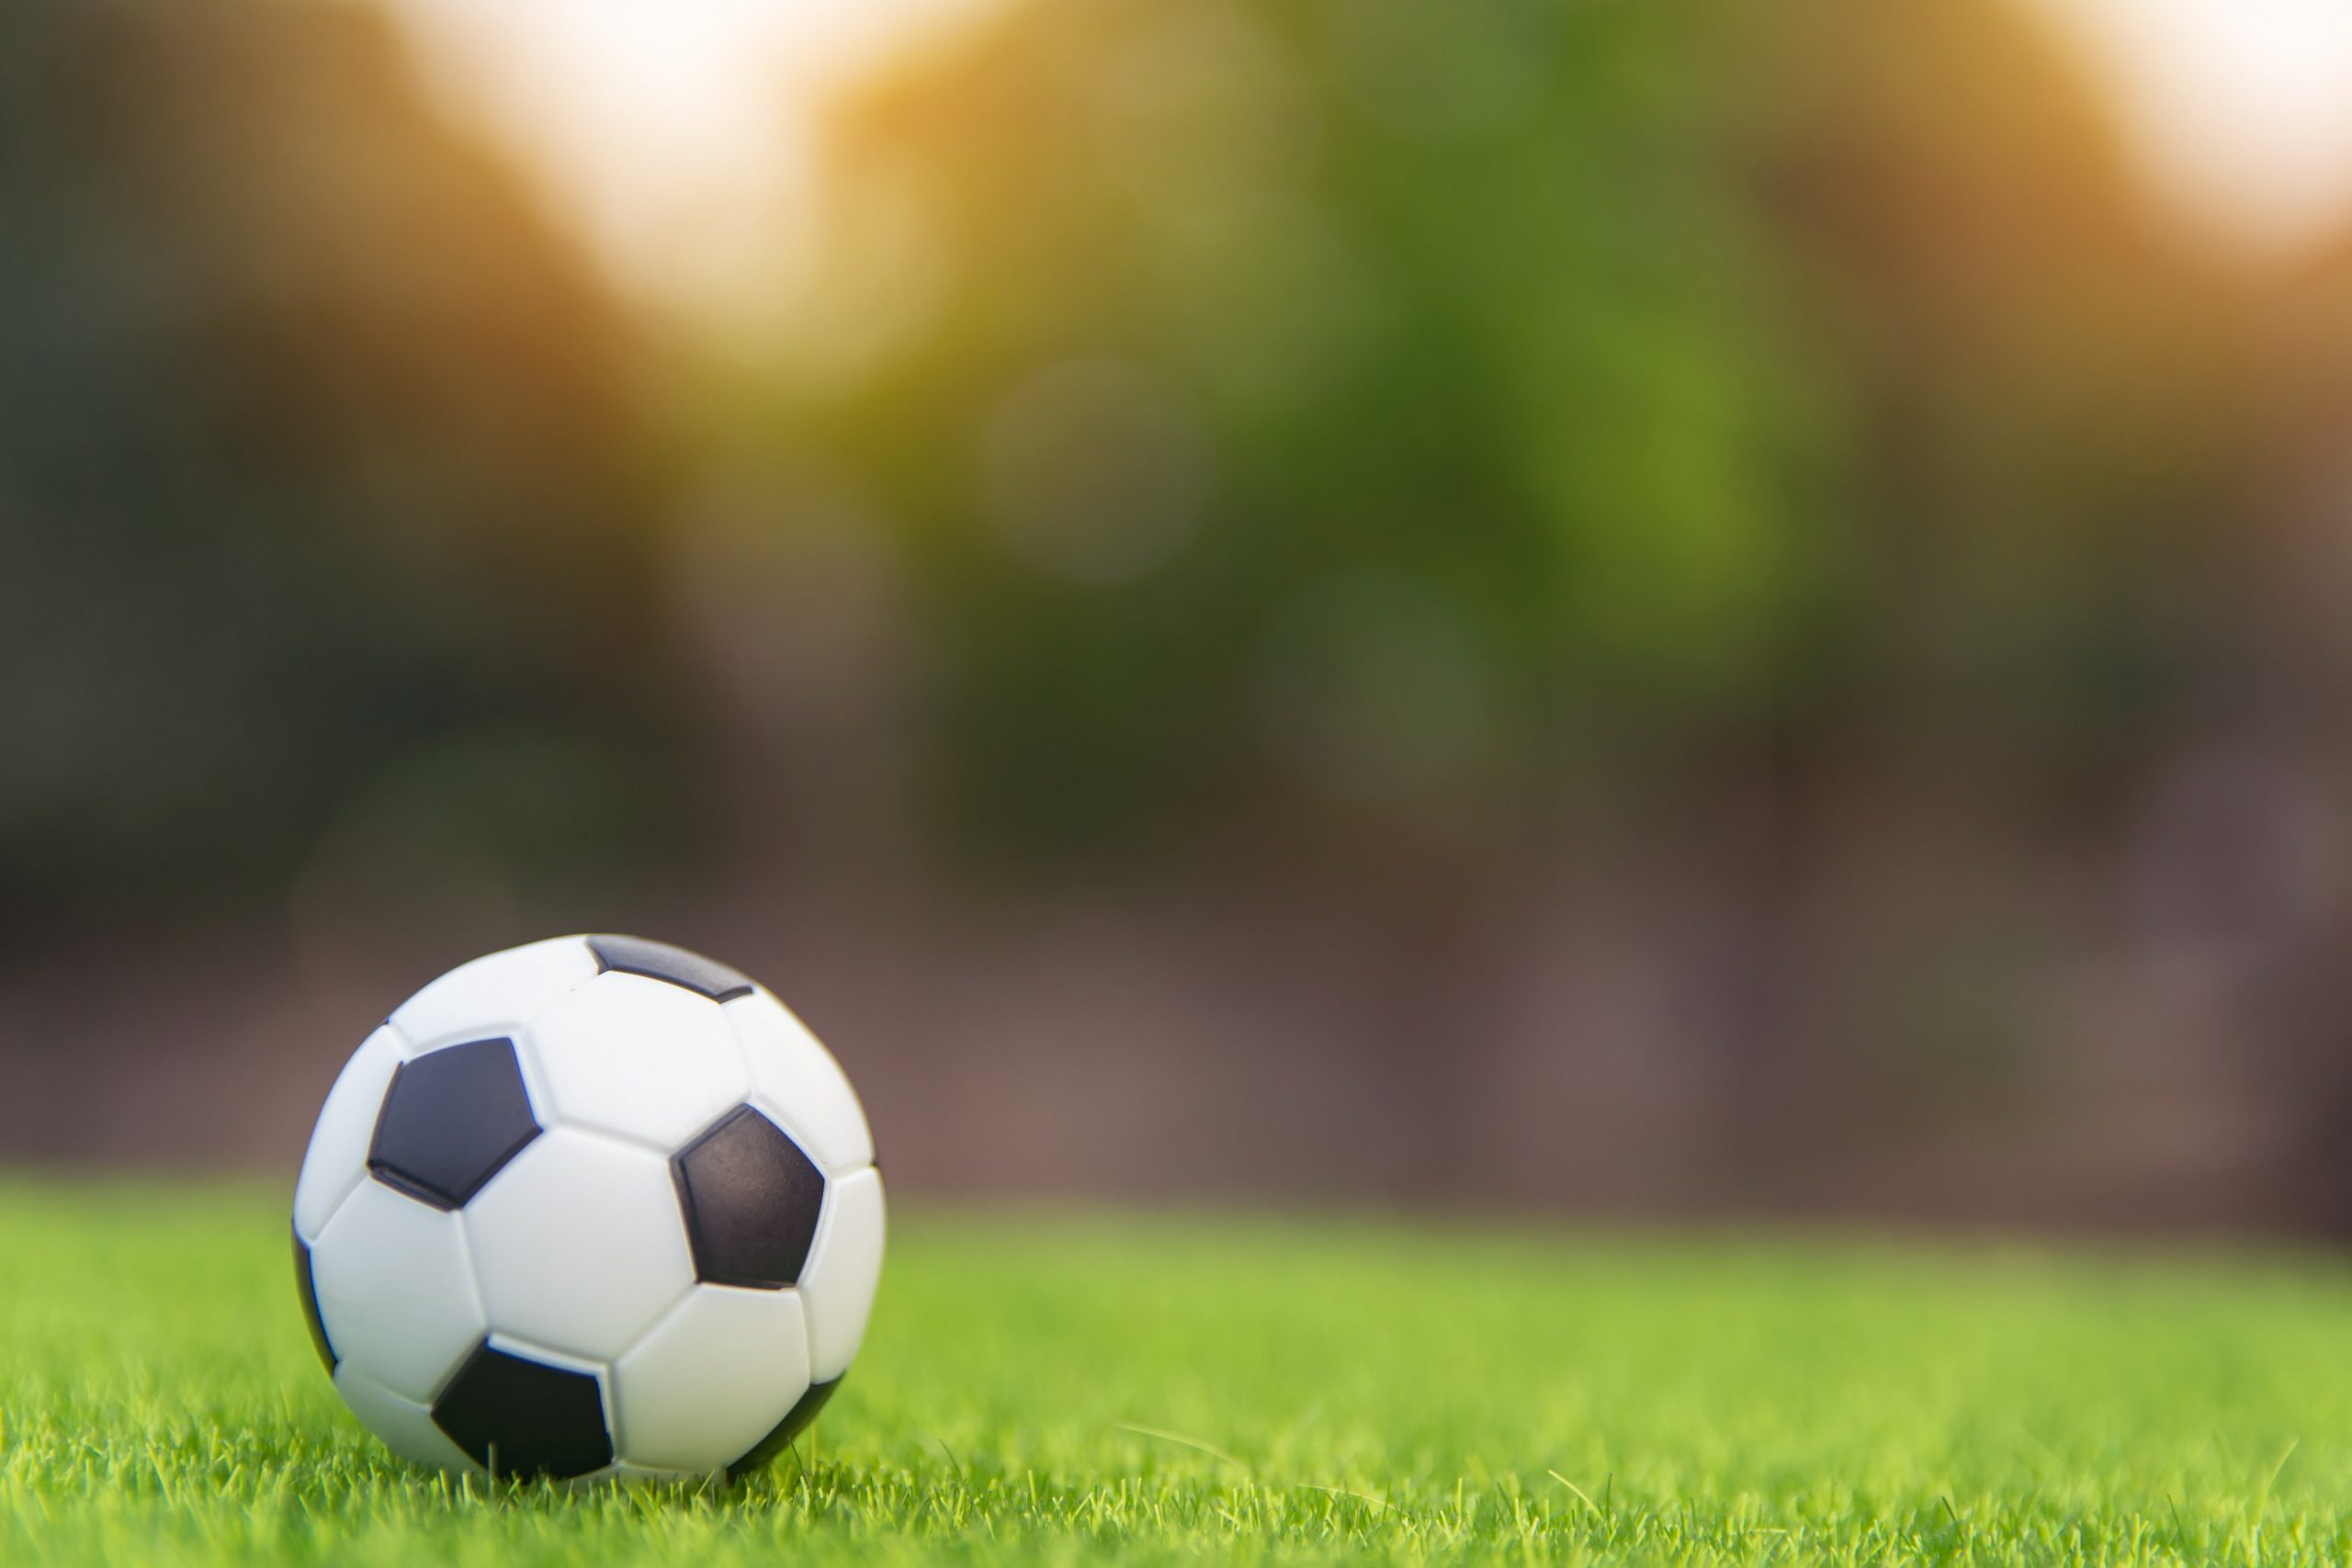 A soccer ball sits in a green field